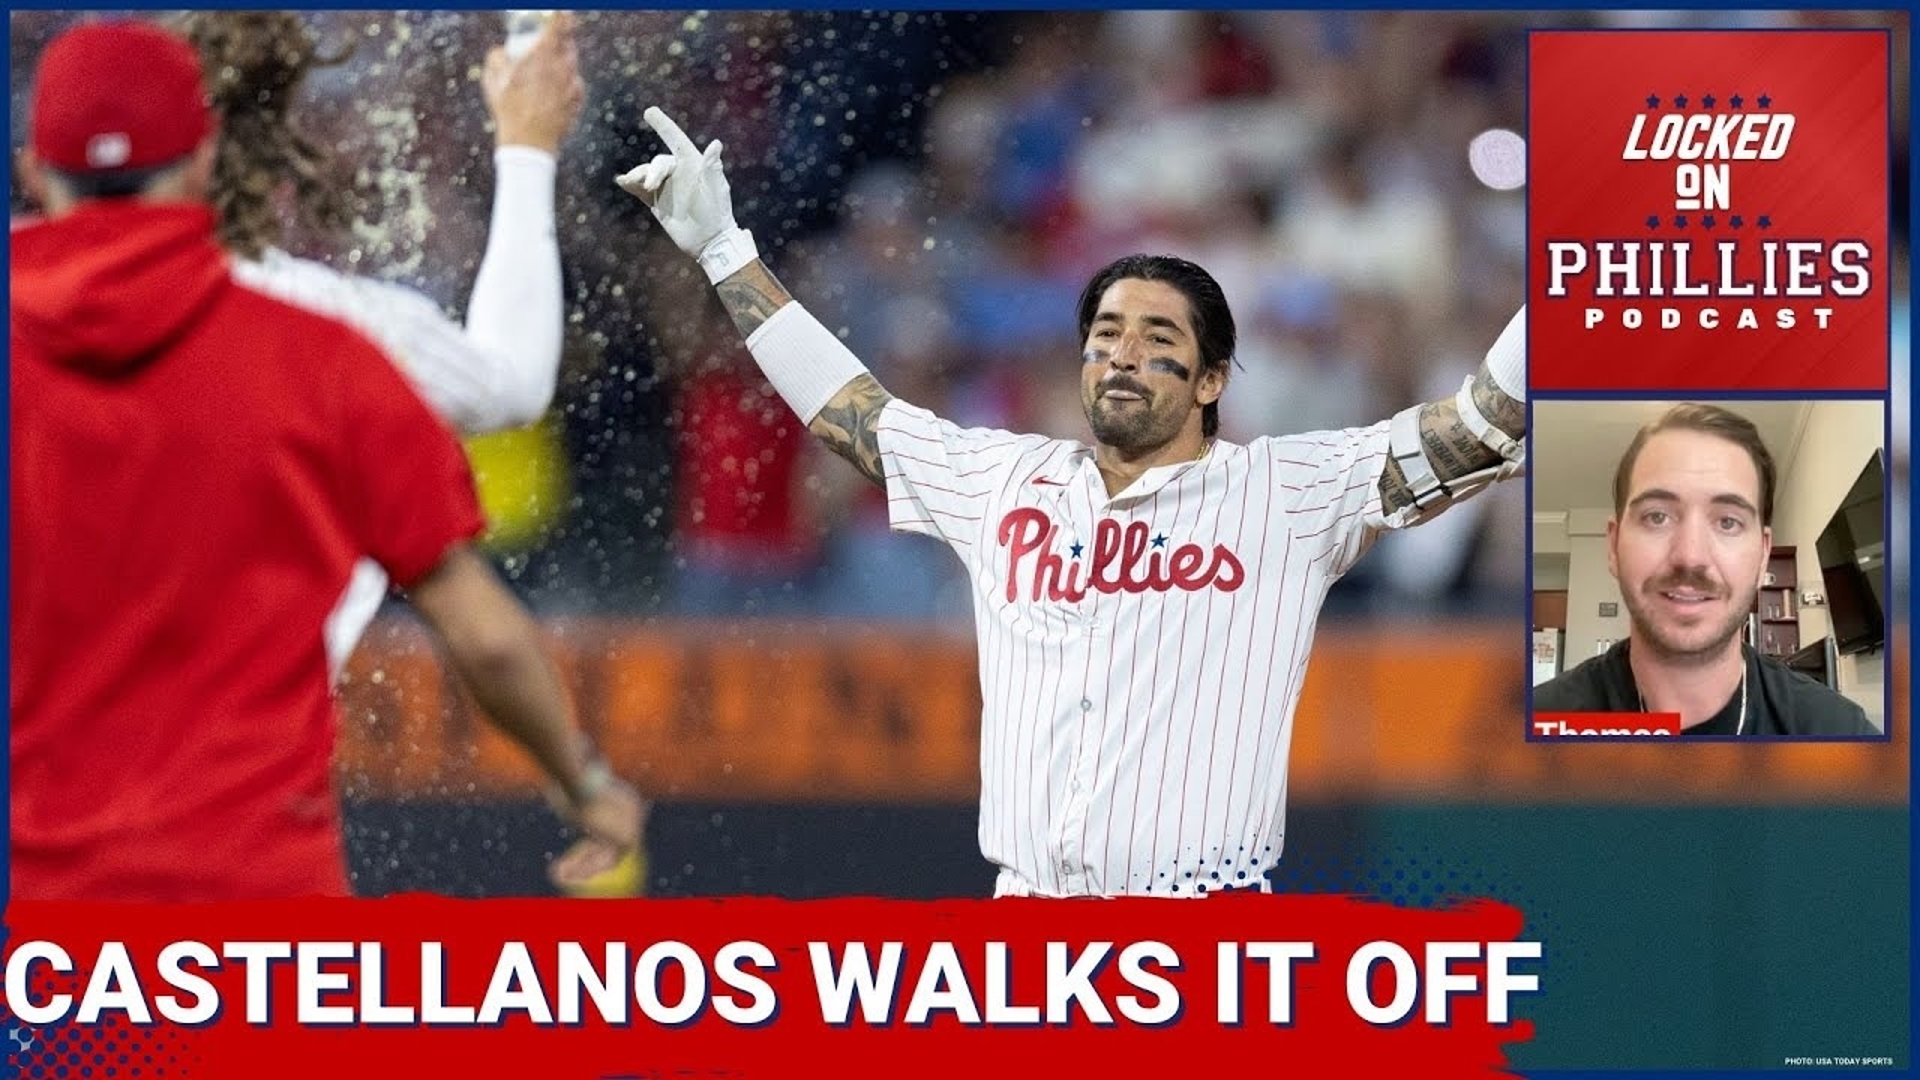 In today's episode, Connor recaps the walk off win by the Philadelphia Phillies last night over the Milwaukee Brewers thanks to Nick Castellanos' double in the 10th.